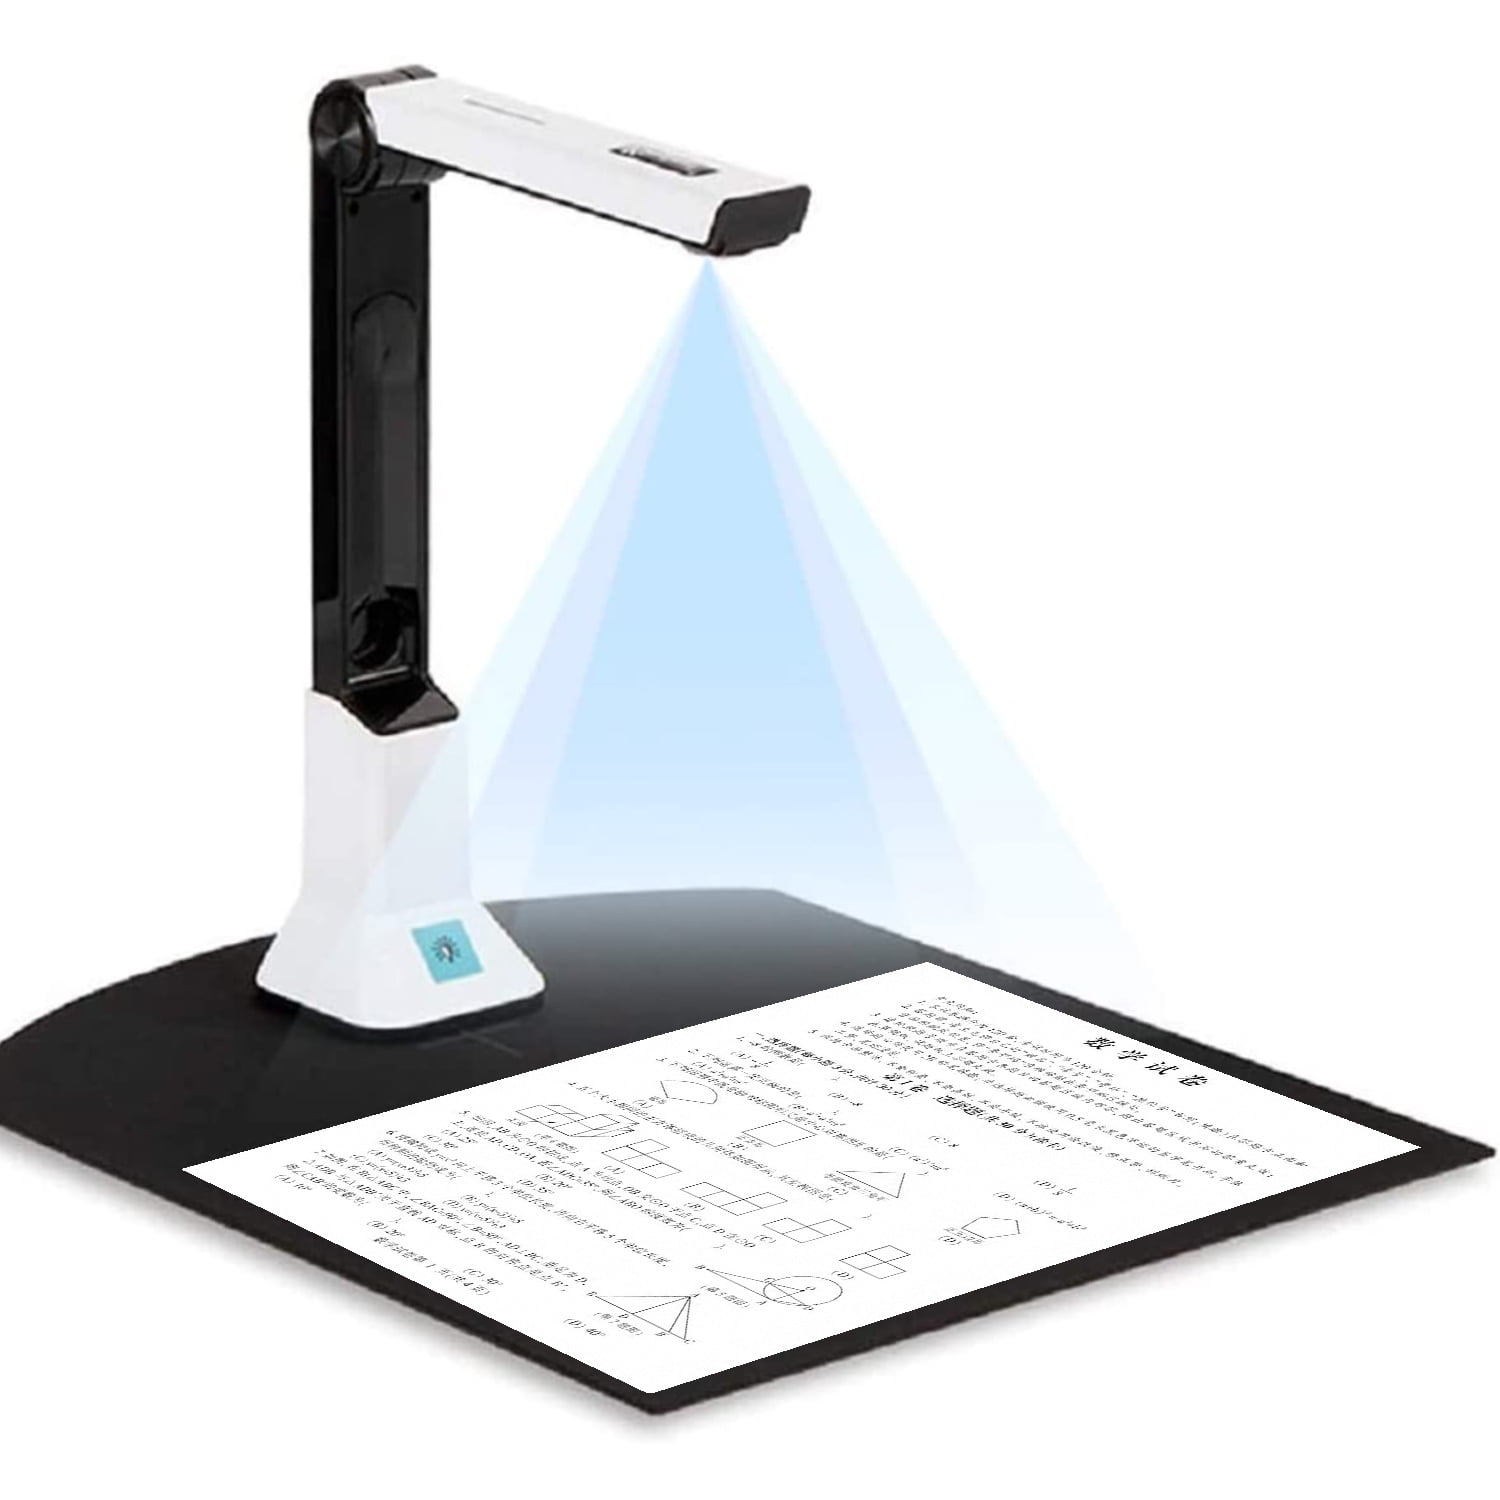 USB Portable Scanner with Real-time Projection Video Recording Versatility A4 Format Document Camera Stand 8MP for Teachers Laptop OCR Multi-Language Recognition for Classroom Distance Learning 